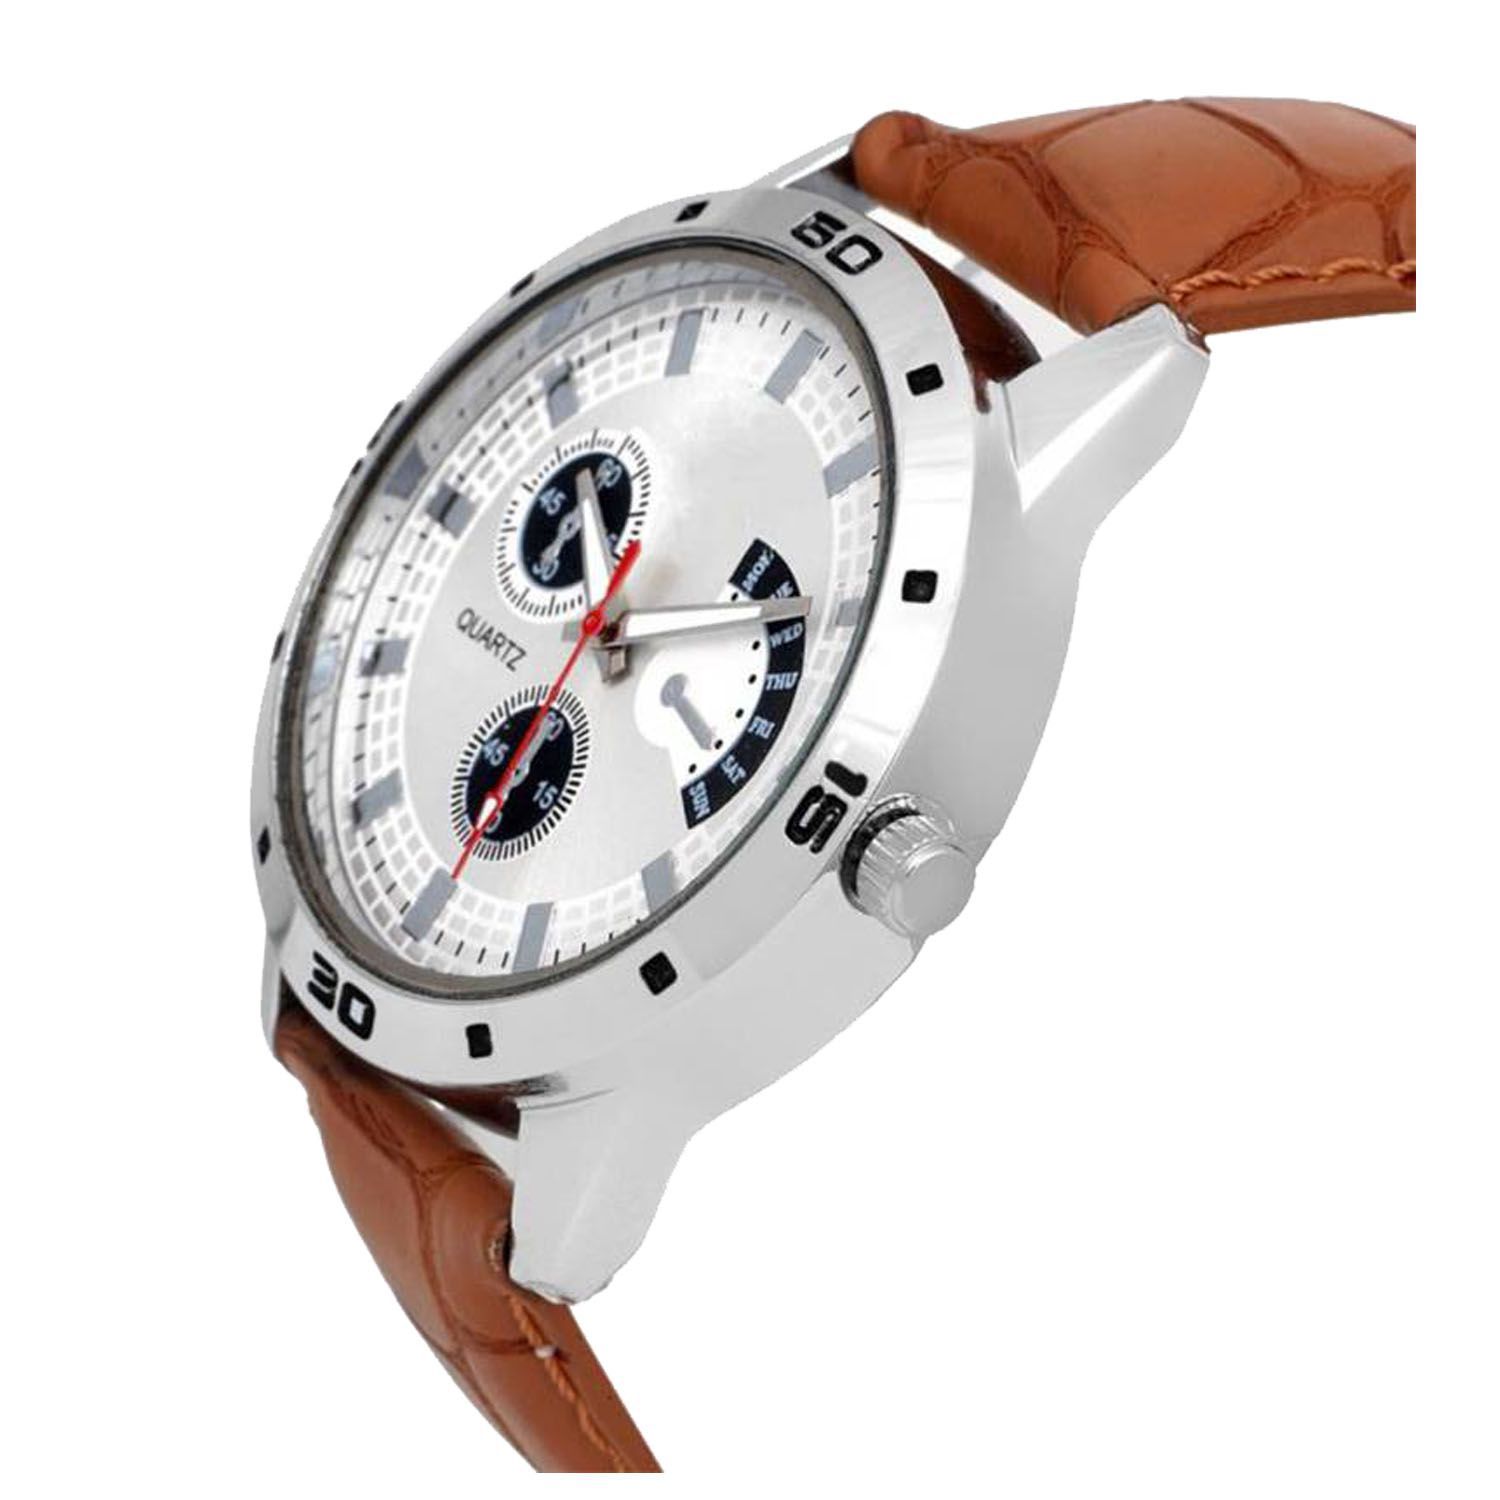 Style Watch Price Clearance, 58% OFF | campingcanyelles.com